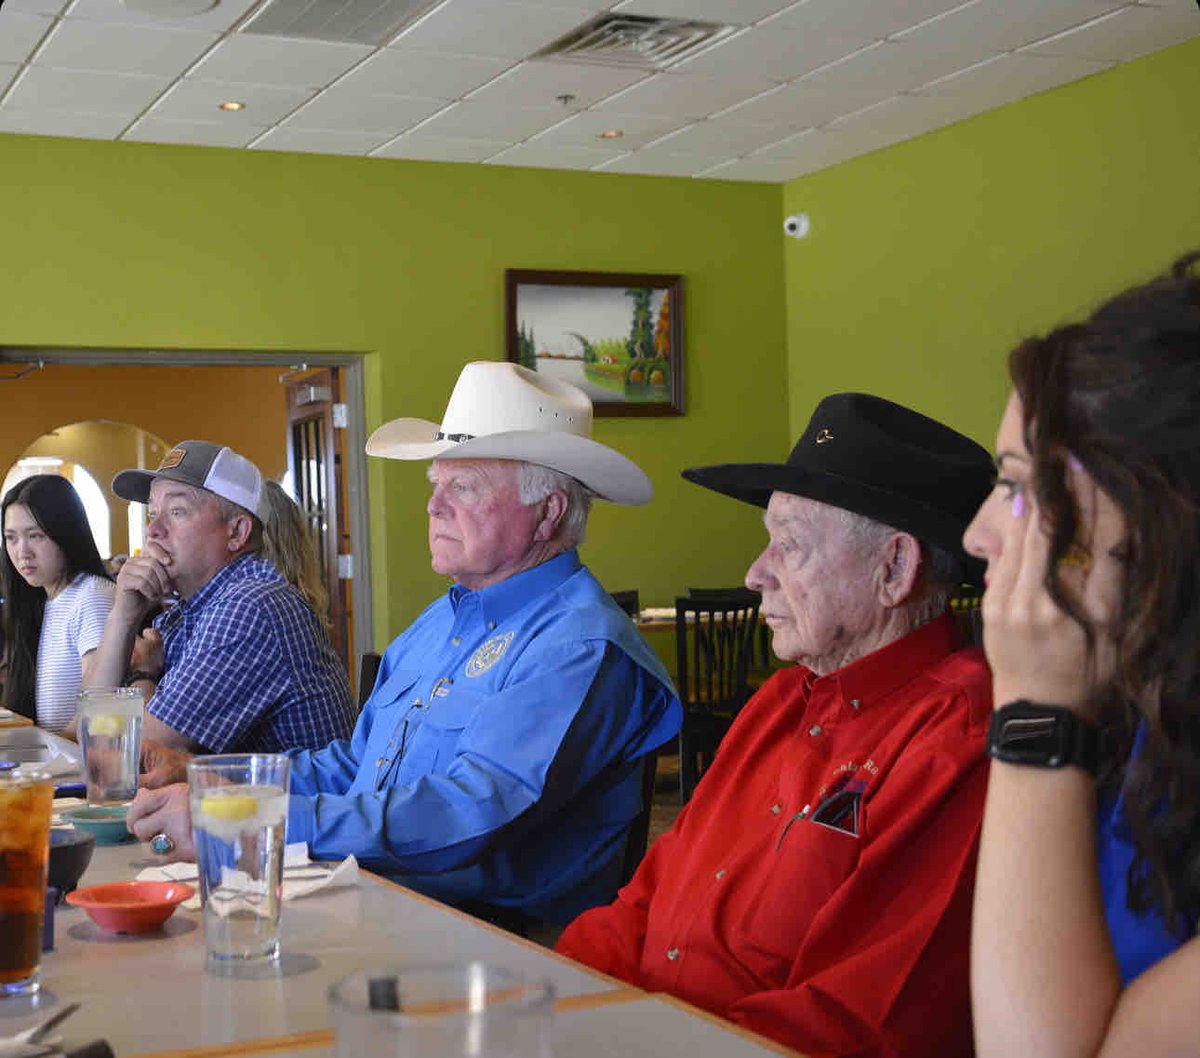 Commissioner Miller joinedTexas ranchers for lunch to hear what the Texas Department of Agriculture could do to help improve responsiveness in future natural disasters #TexasAgricultureMatters